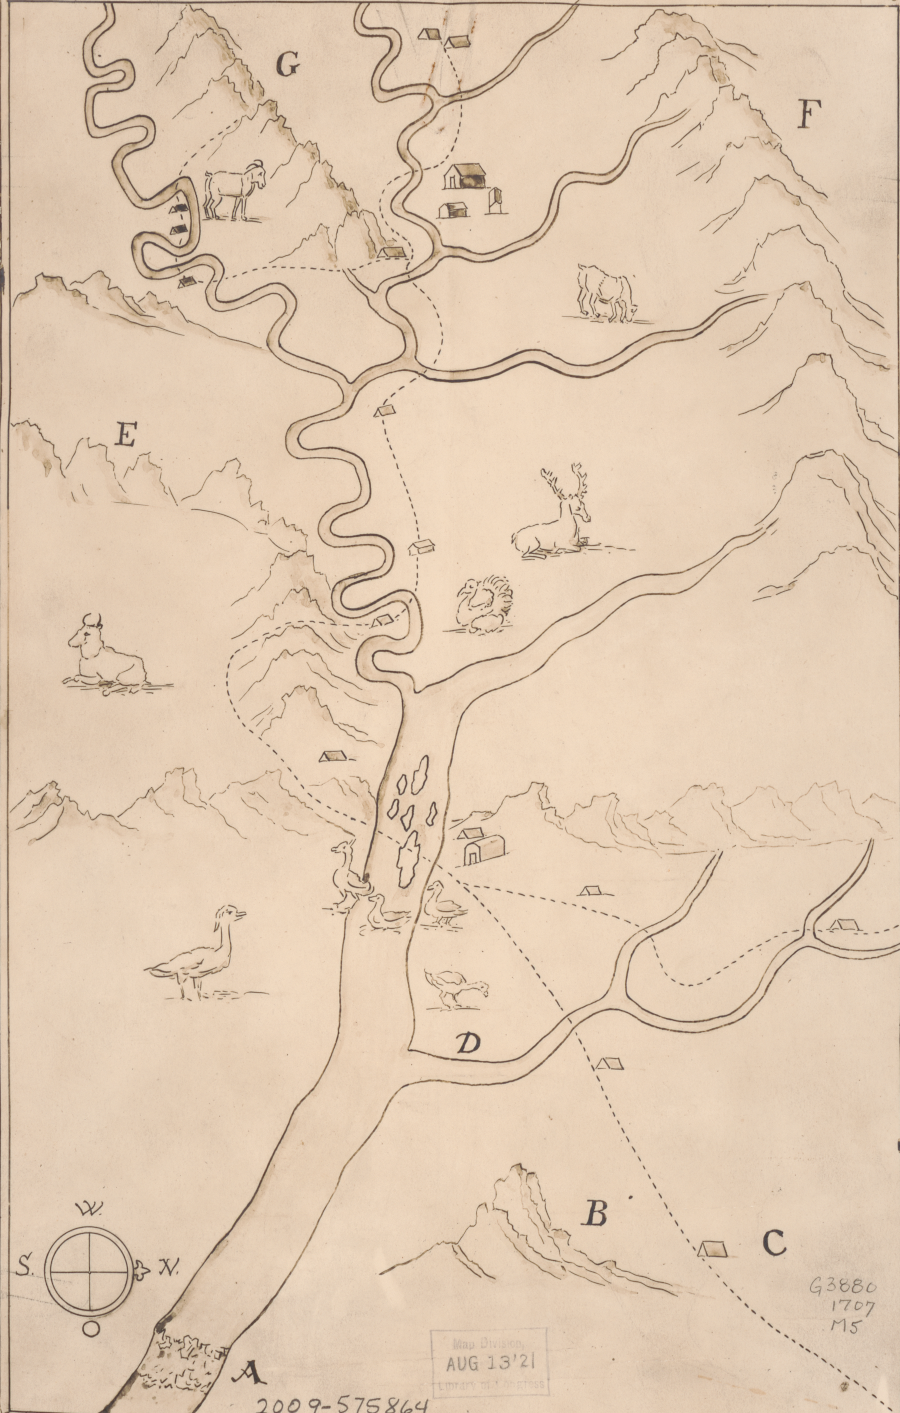 Frantz Ludwig Michel was the first European to map the pattern of rivers and mountains in the Shenandoah Valley